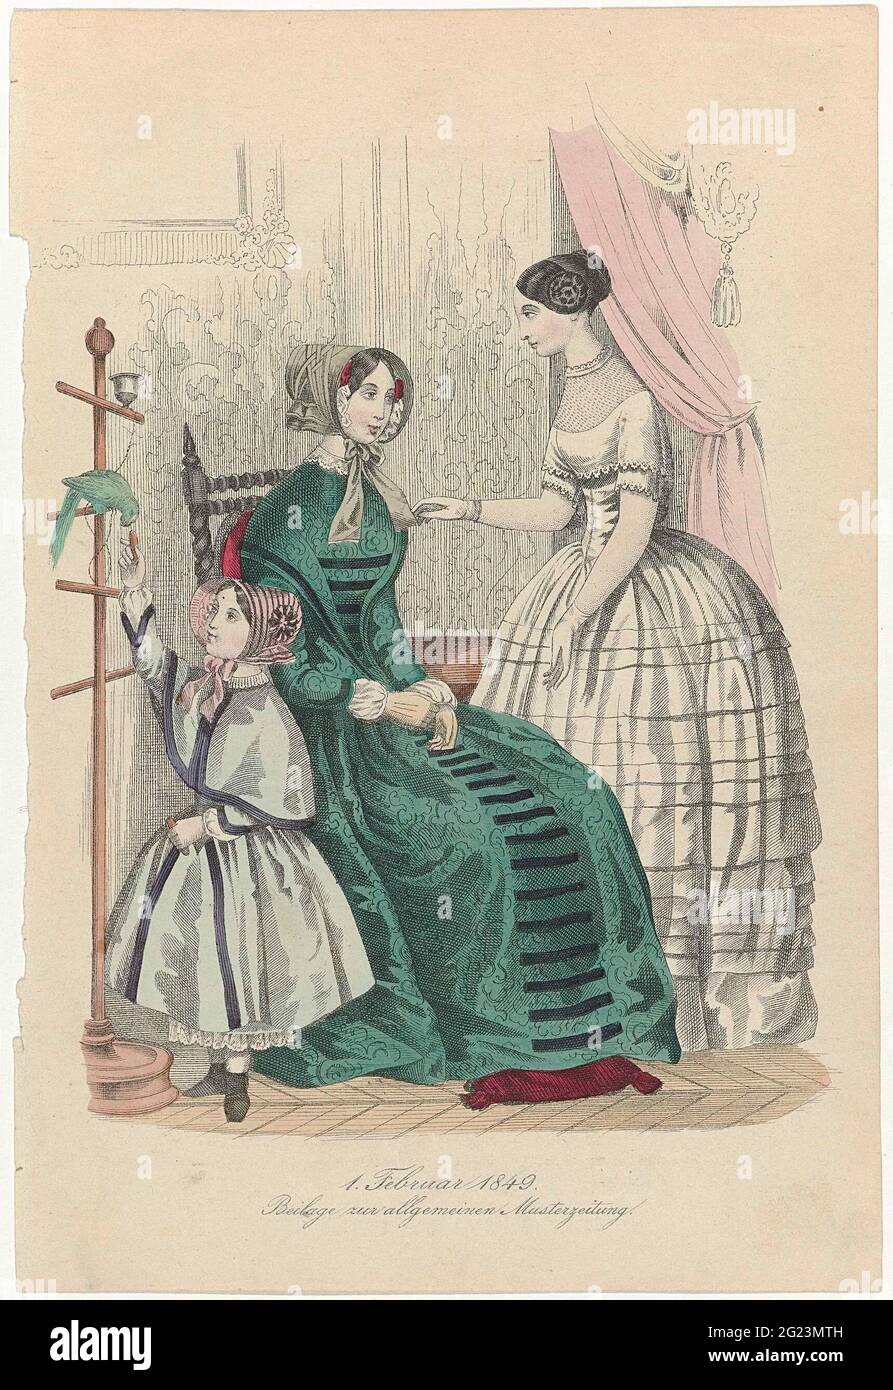 Allgemein Musterzeitung, Beilage Zur Allgemeinen Musterzeitung, 1 February 1849. Standing woman in evening girl with bootthals, pointed bodice and wide striped skirt. Woman sitting on a chair, in a junior mid-front decorated with stripes. Long sleeves and pleated under-sleeves. Children's clothing: Girl, who performs a parrot. Print from the Modelijdschrift Allgemeinen Musterzeitung (1844-1865). The print is, except the standing woman, a copy in mirror image to 25 octobre 1848, Magasin des Demoiselles, Paris, 1844-1896. Stock Photo